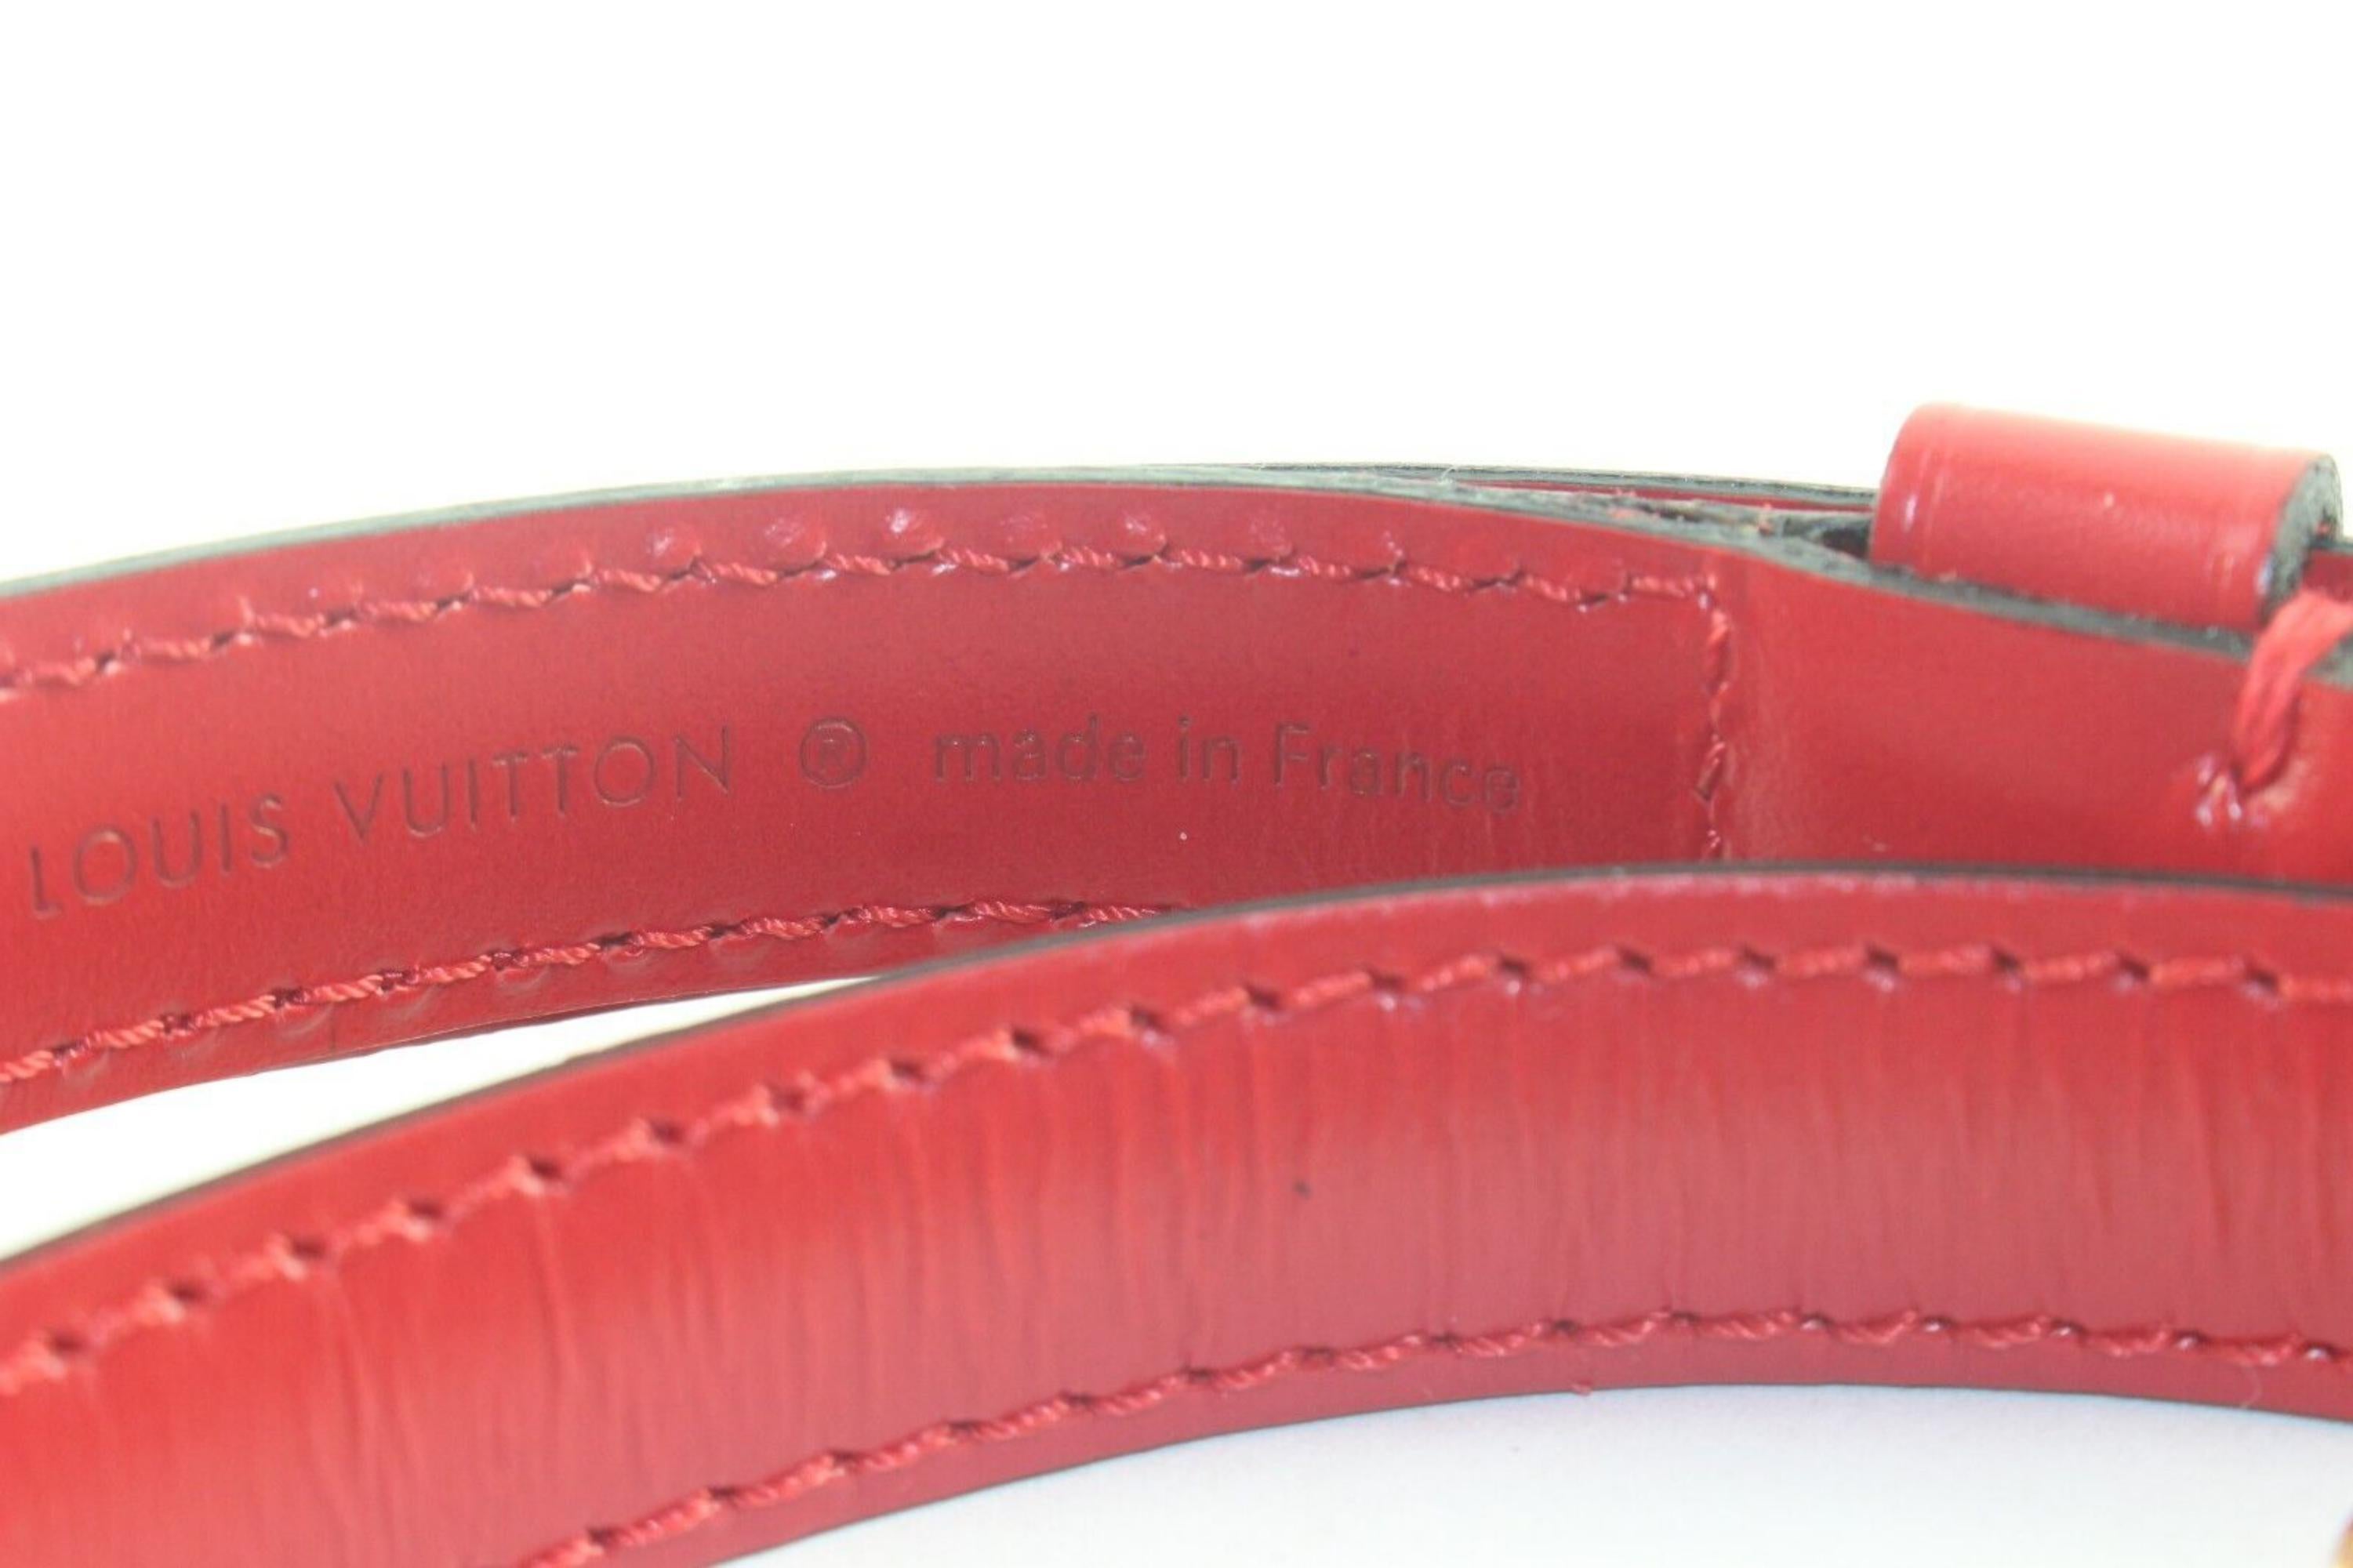 Louis vuitton RED ADJUSTABLE SHOULDER STRAP 6LKO126K In Excellent Condition For Sale In Dix hills, NY